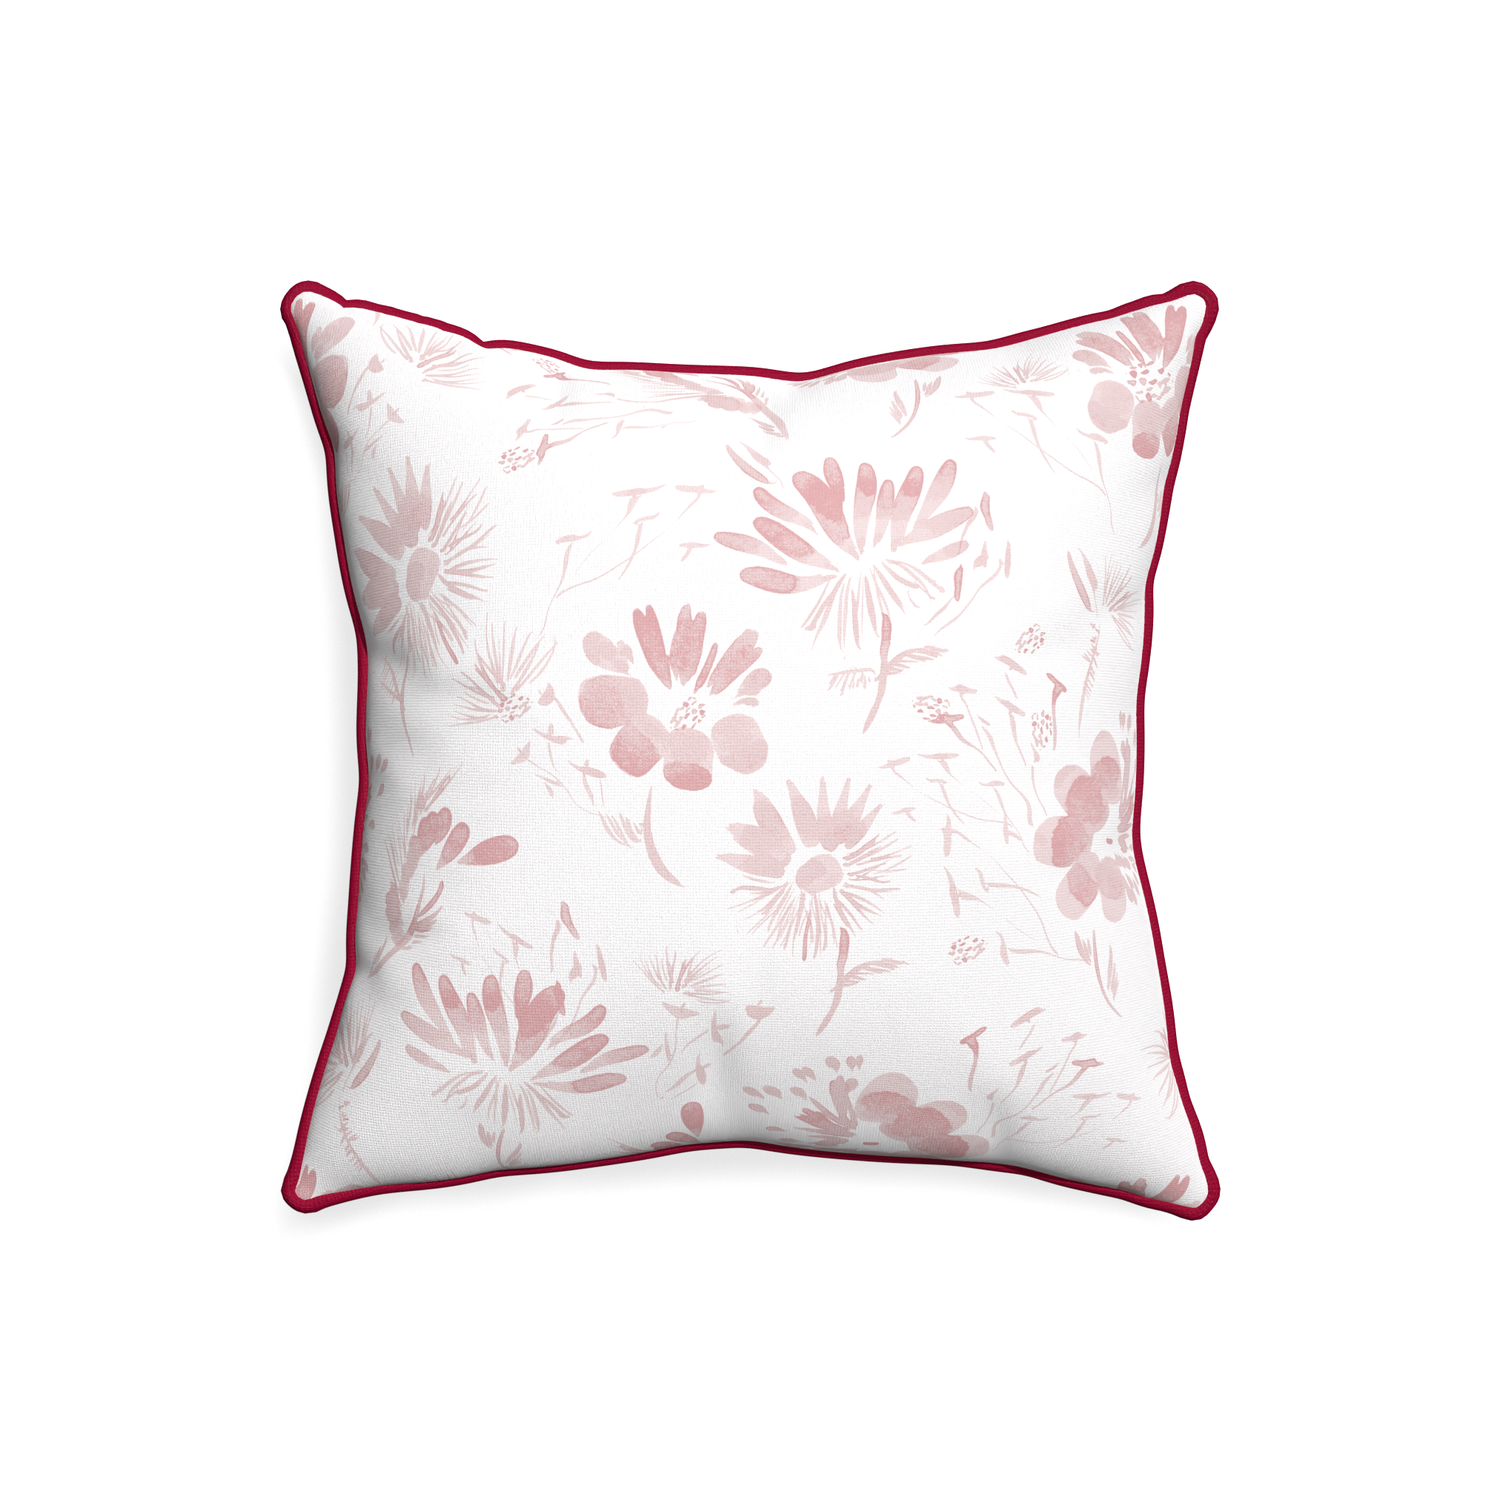 20-square blake custom pillow with raspberry piping on white background